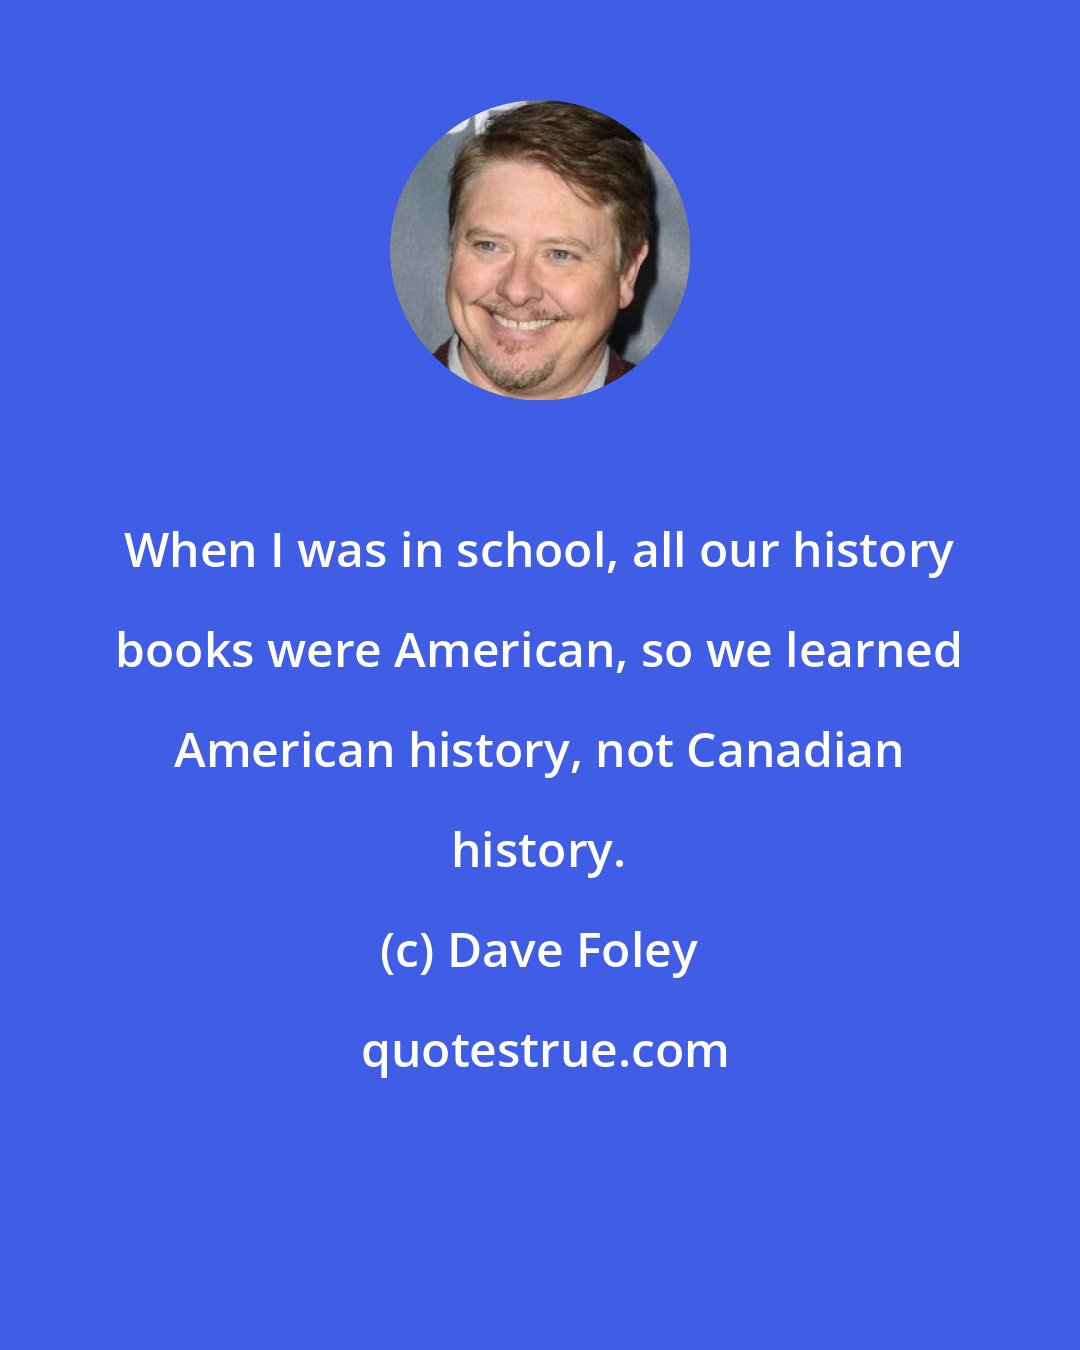 Dave Foley: When I was in school, all our history books were American, so we learned American history, not Canadian history.